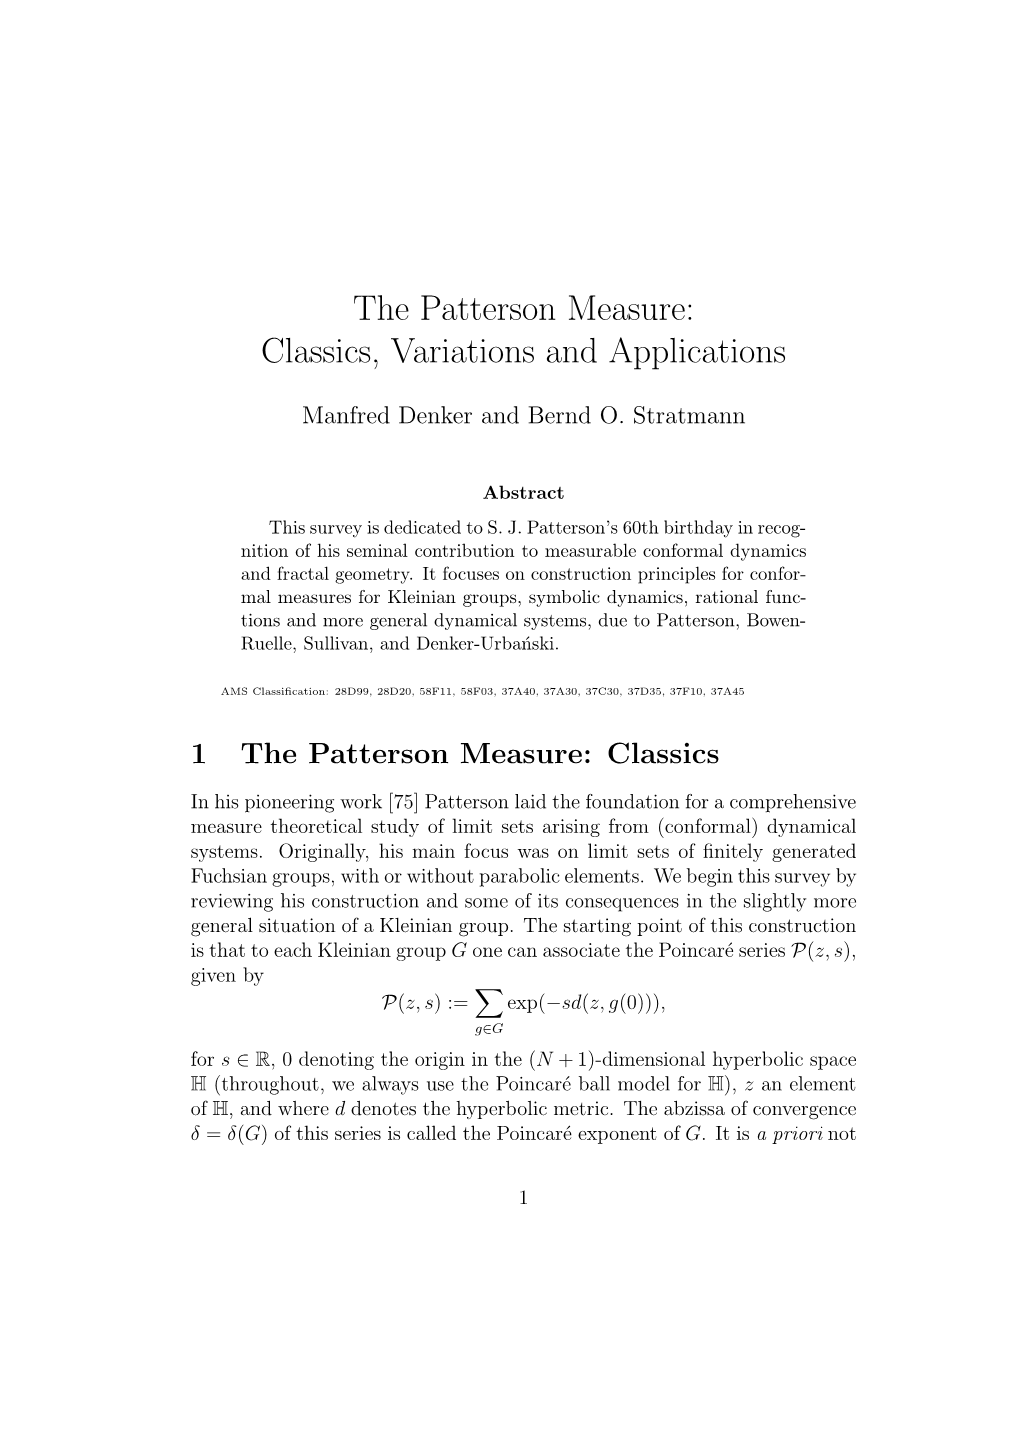 The Patterson Measure: Classics, Variations and Applications